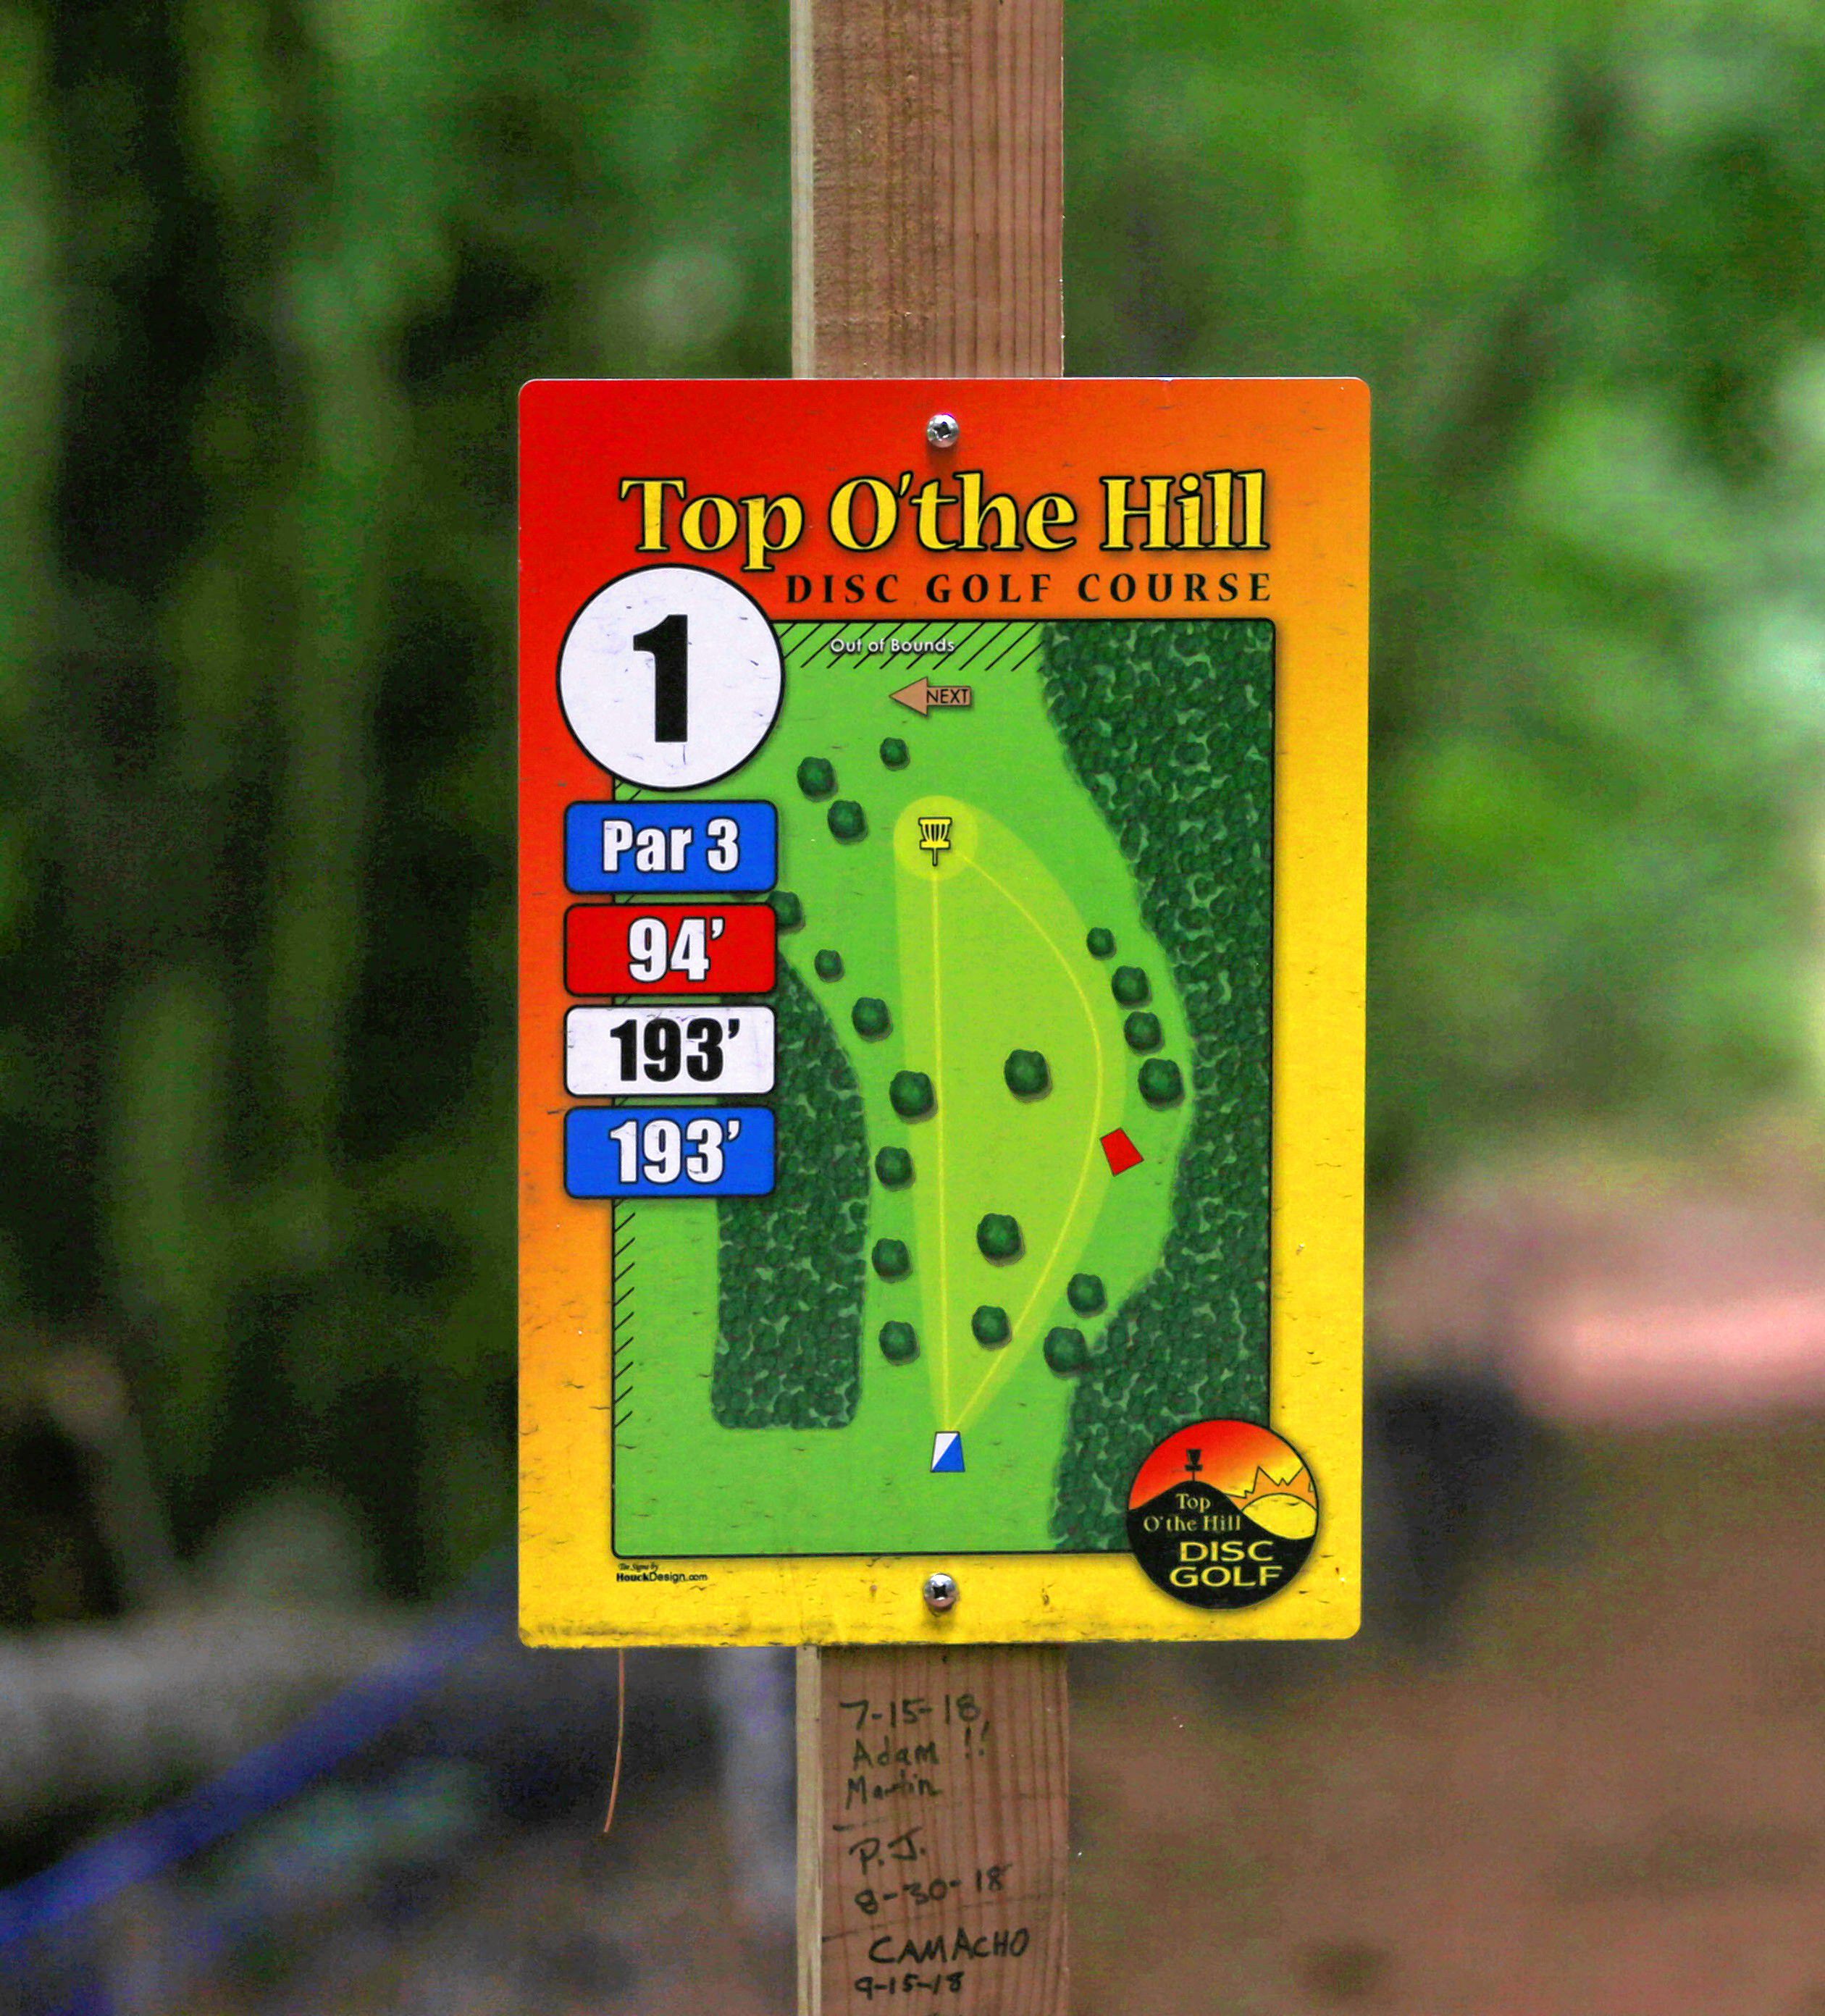 Similar to normal golf, many disc golf courses offer players a view of each hole near the tee box, including the distance and shots needed to reach par.